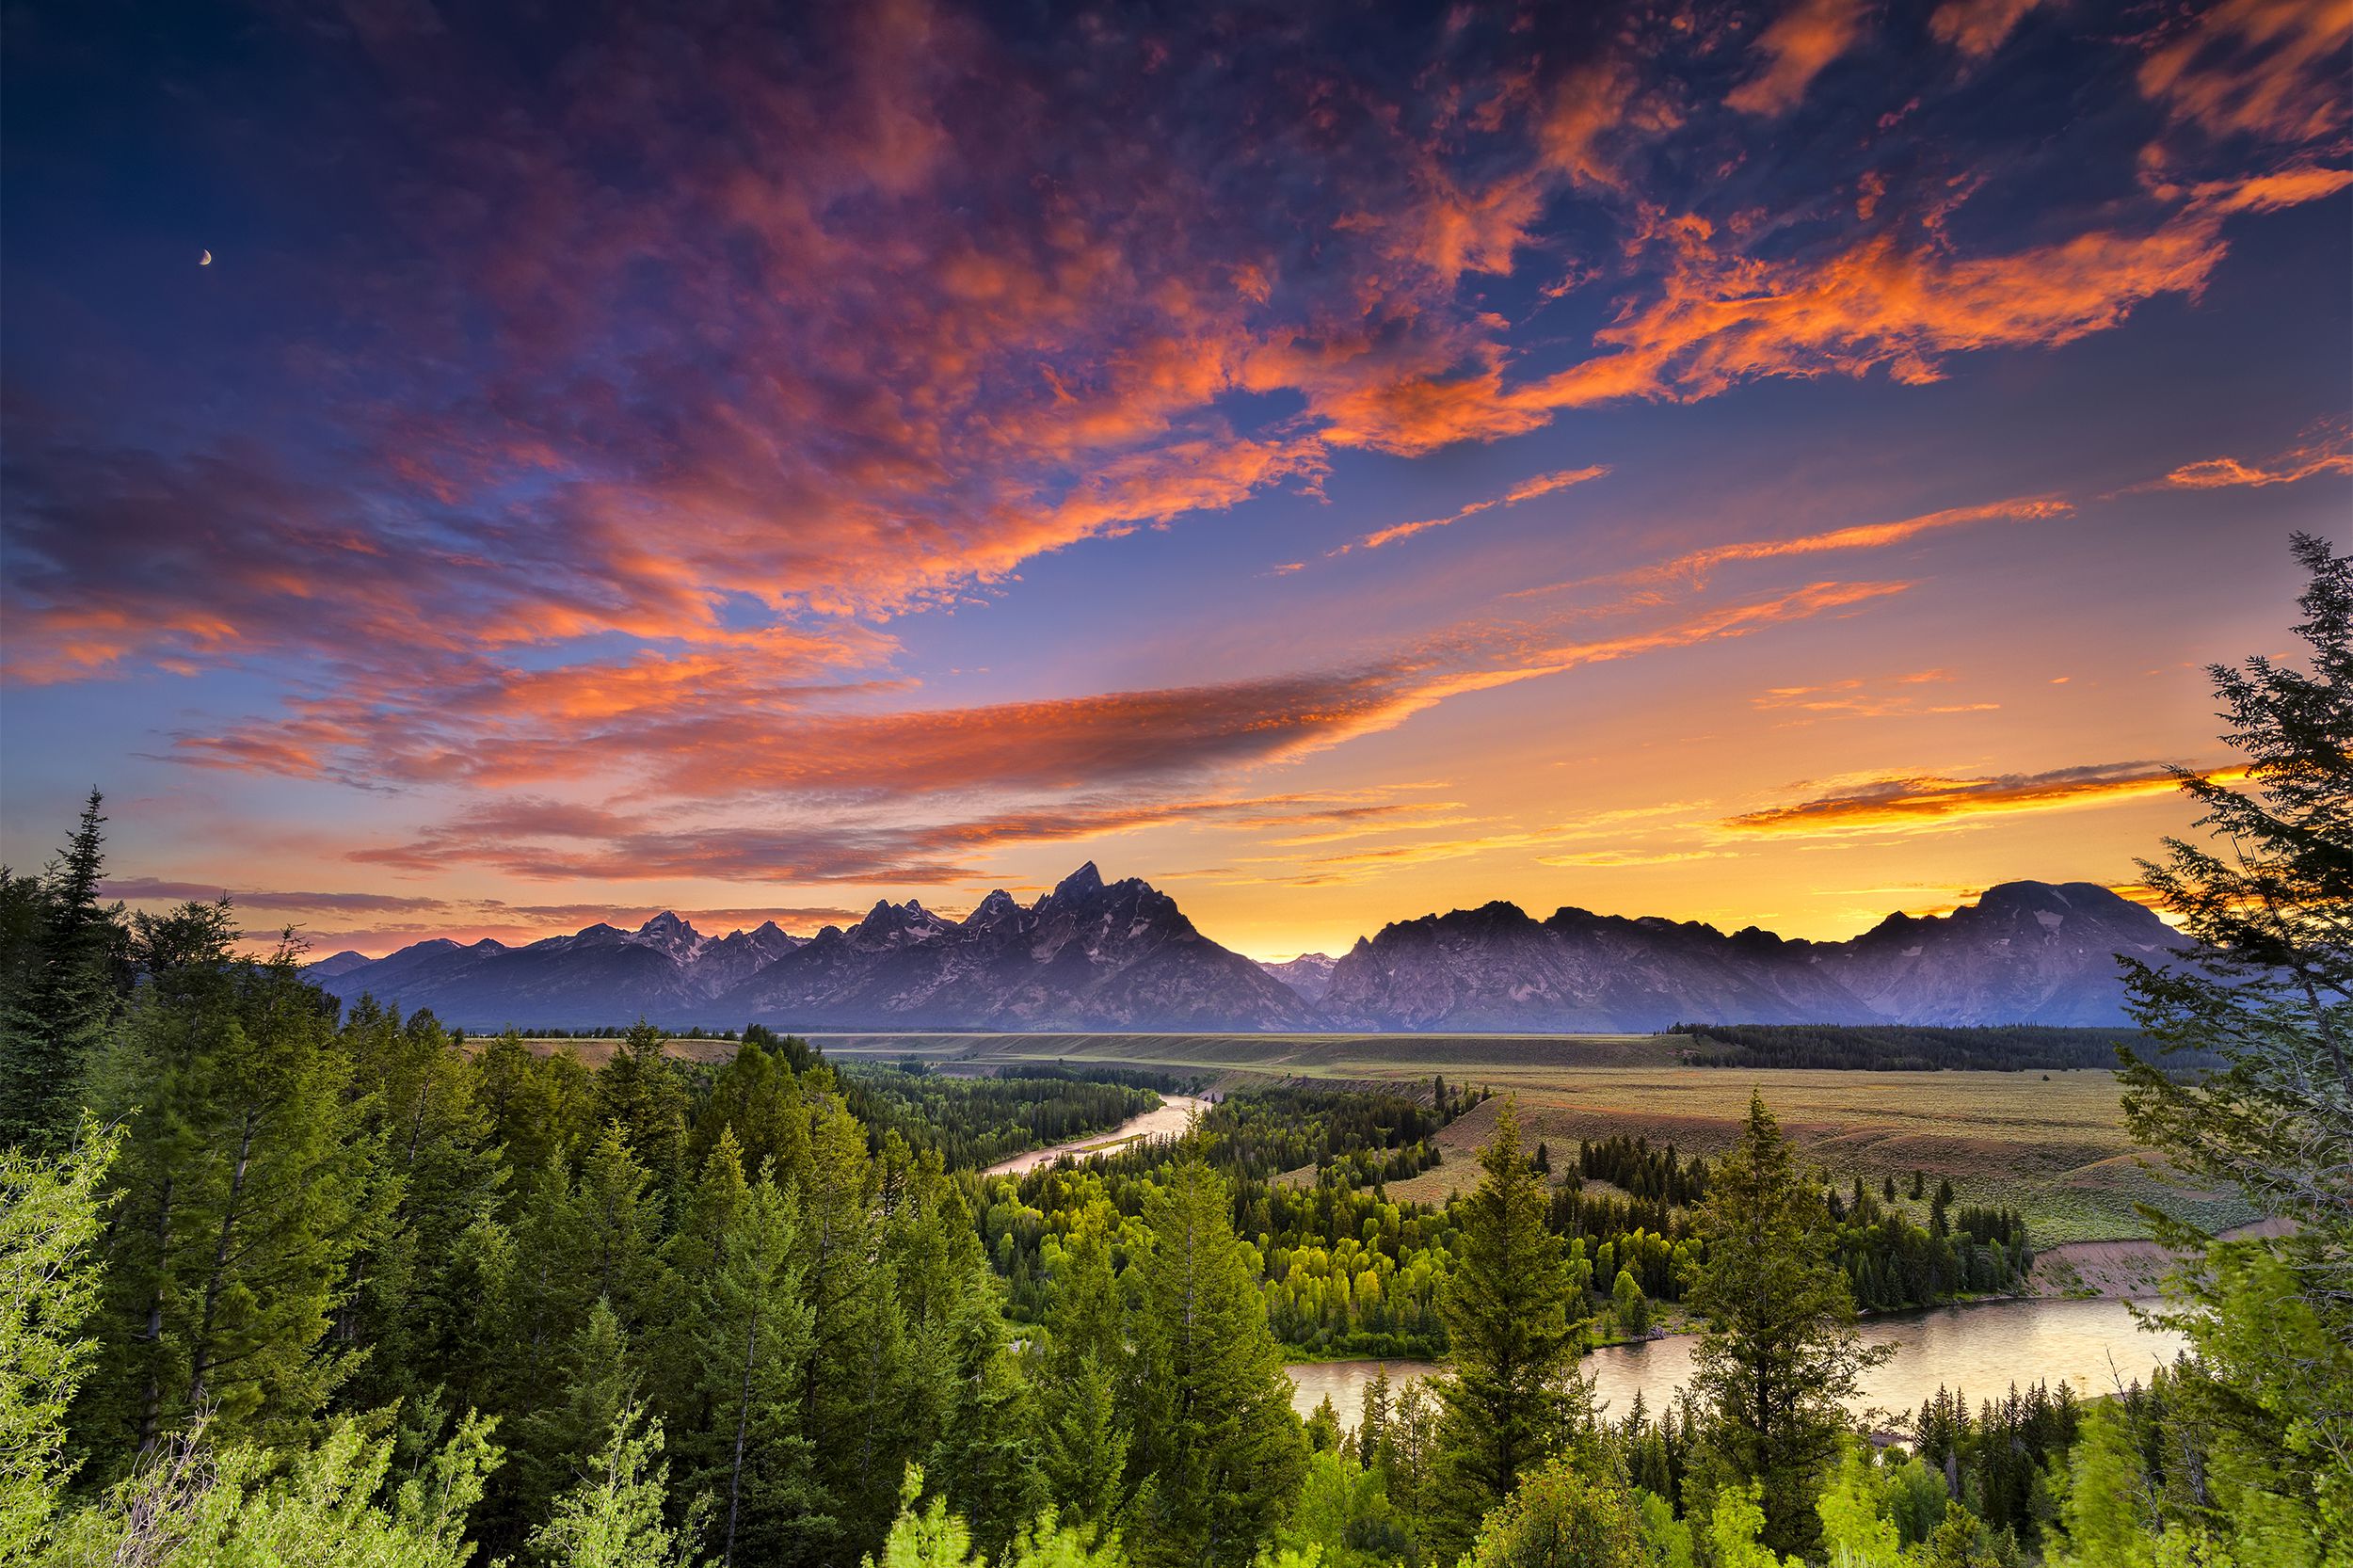 <p>Often visited in conjunction with nearby Yellowstone National Park, <a href="https://www.nps.gov/grte/index.htm">Grand Teton</a> offers 310,000 sweeping acres made up of meadows, lakes, and, of course, the namesake Teton Range. There are also 200 miles of trails here and the Snake River, offering yet another way to take-in this  breathtaking landscape. </p>